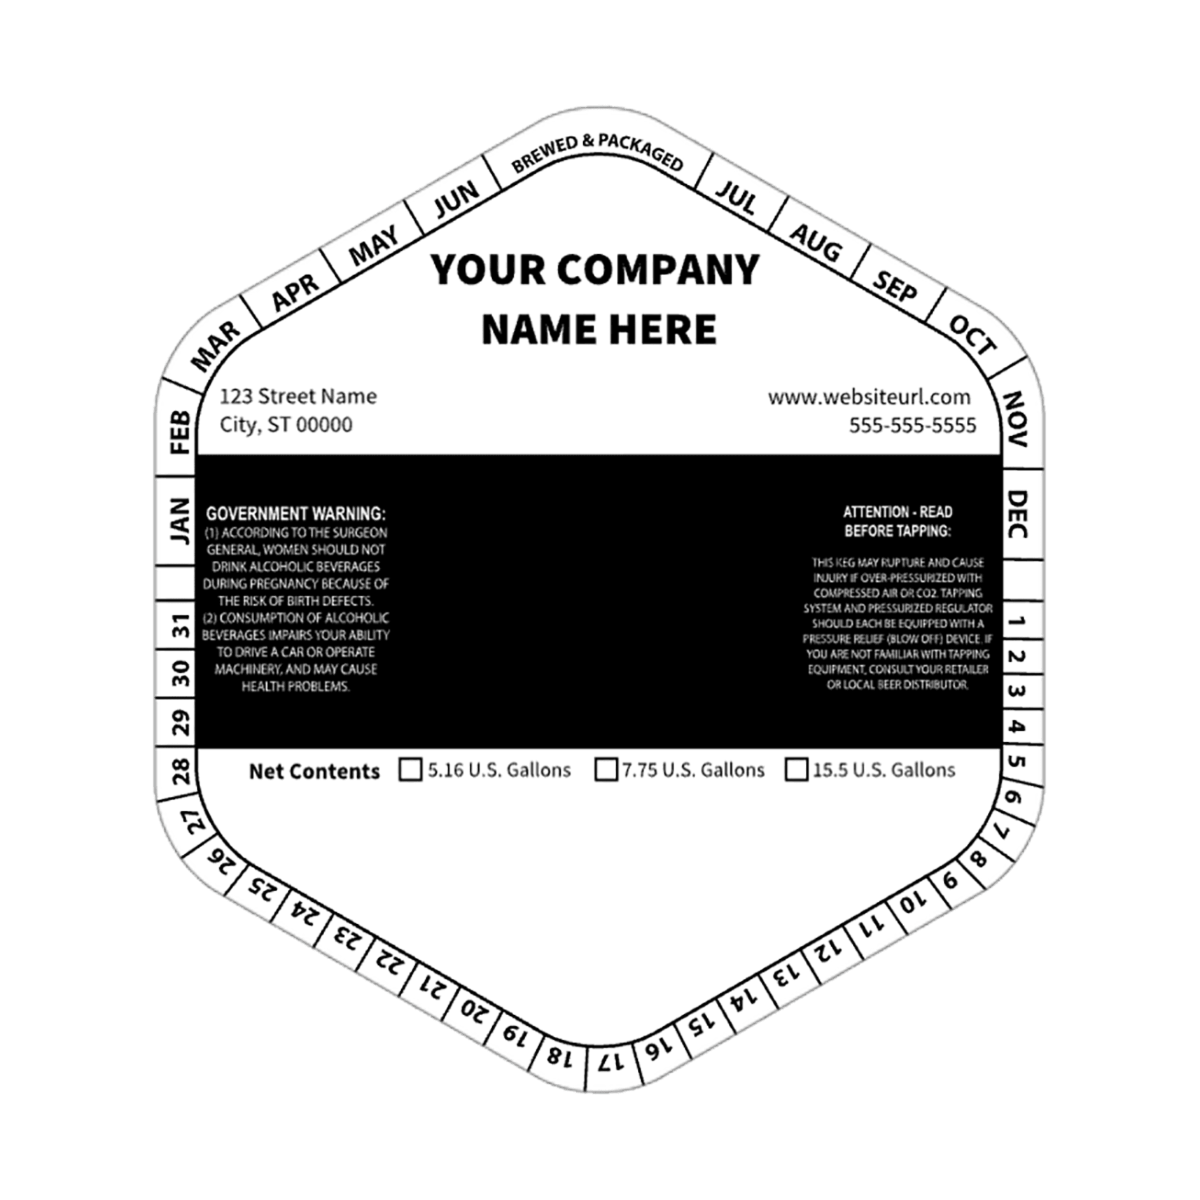 5.1432 Hexagon Keg Collar B&W Striped Template: Text with Blank Area